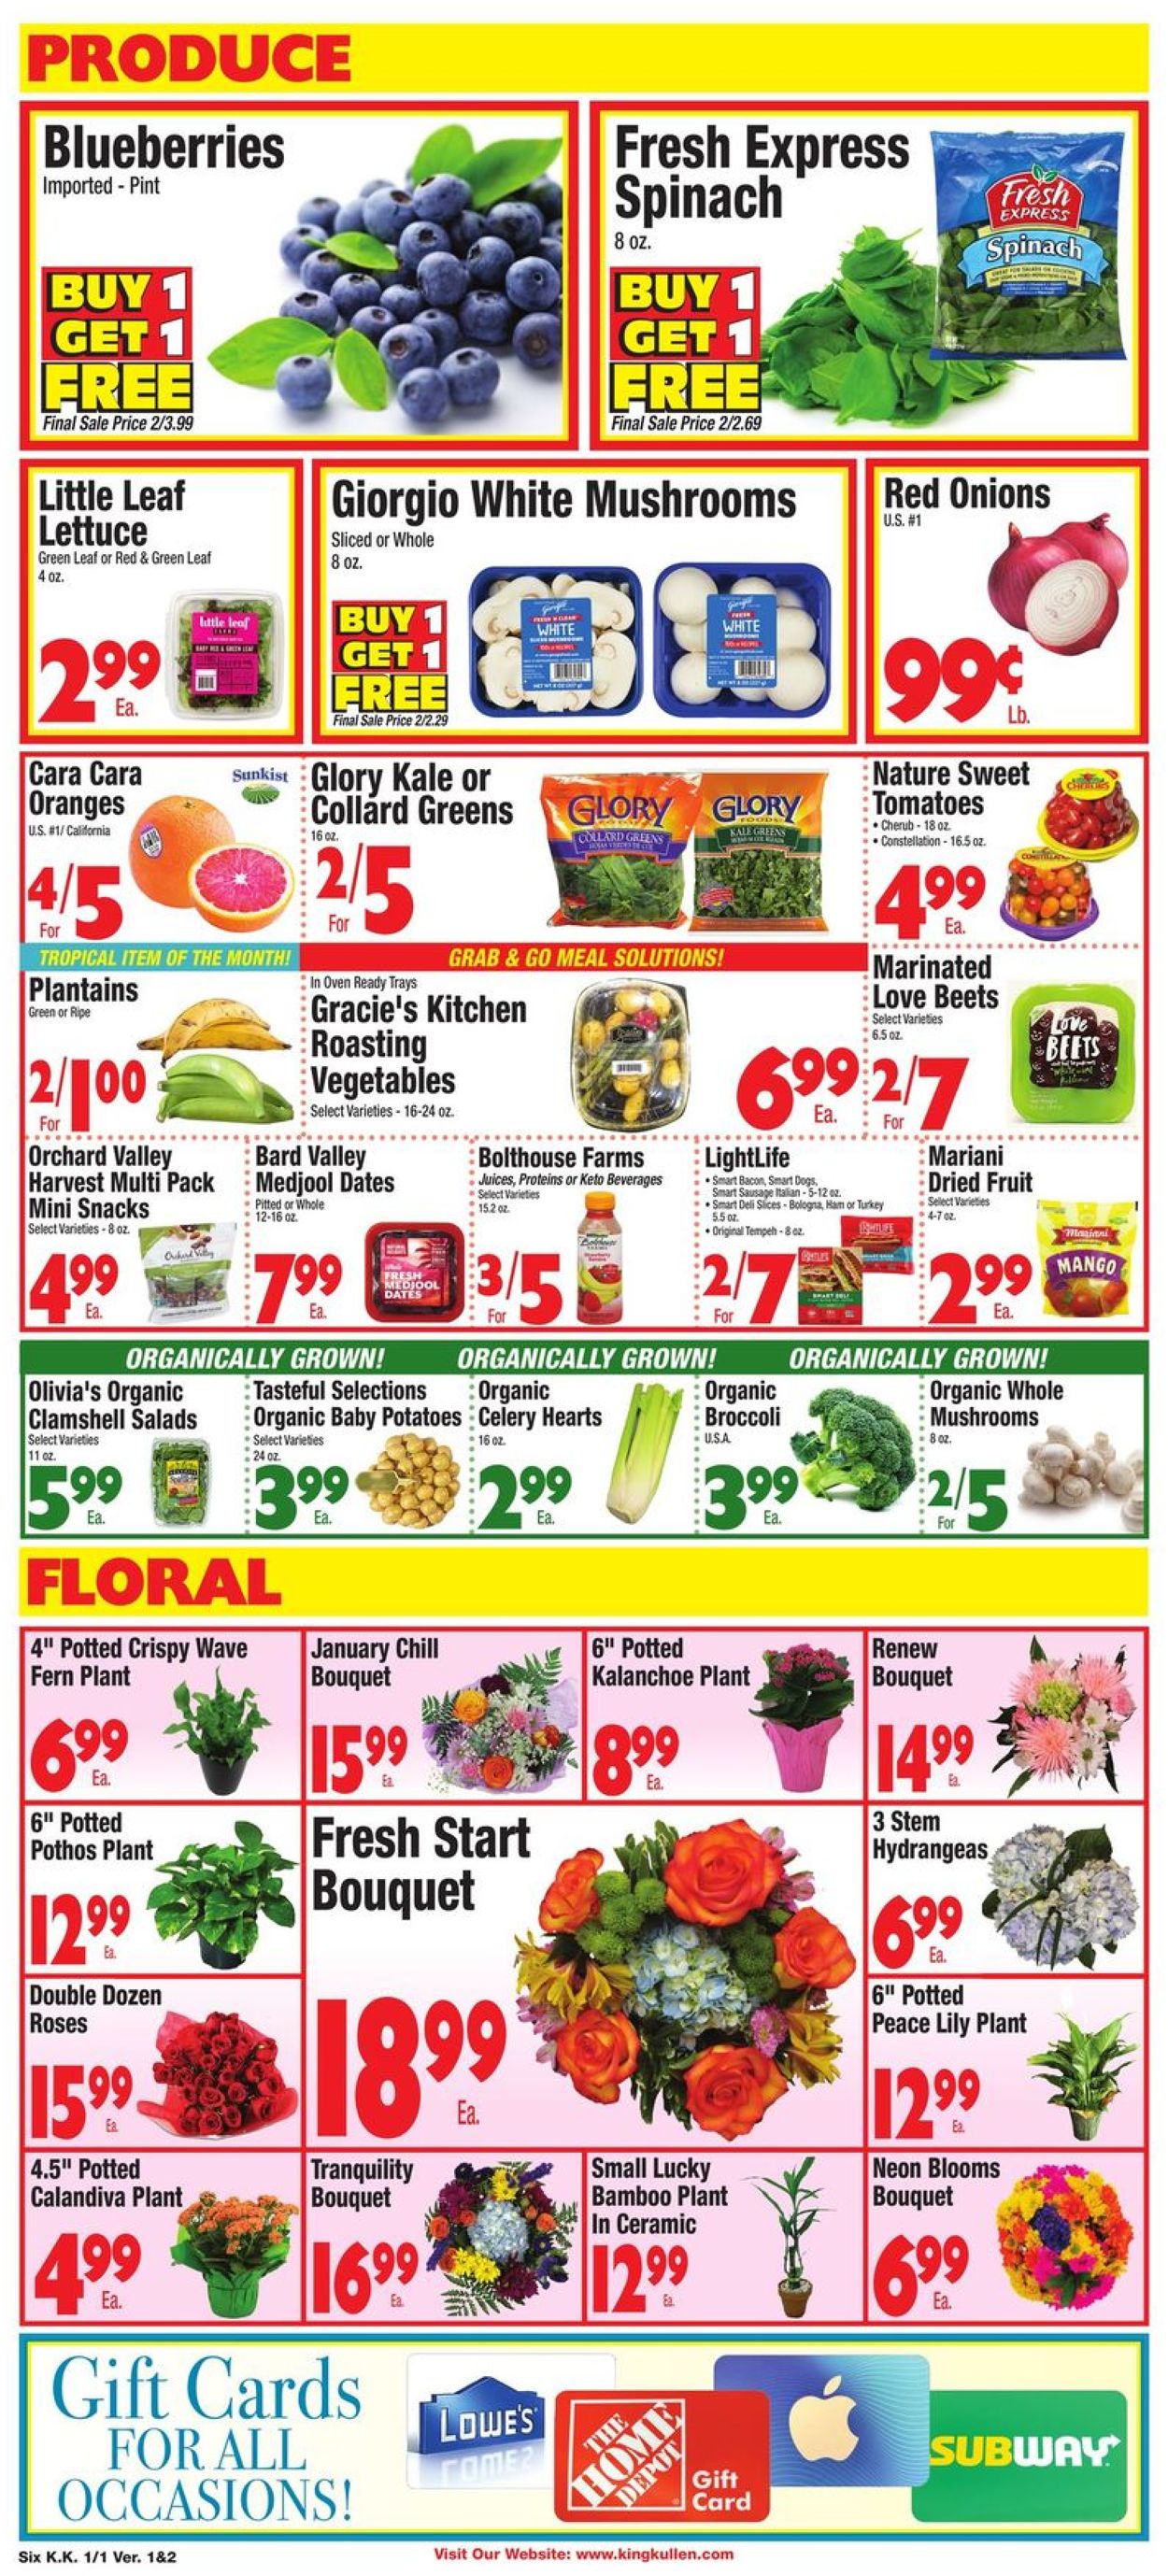 King Kullen Ad from 01/01/2021